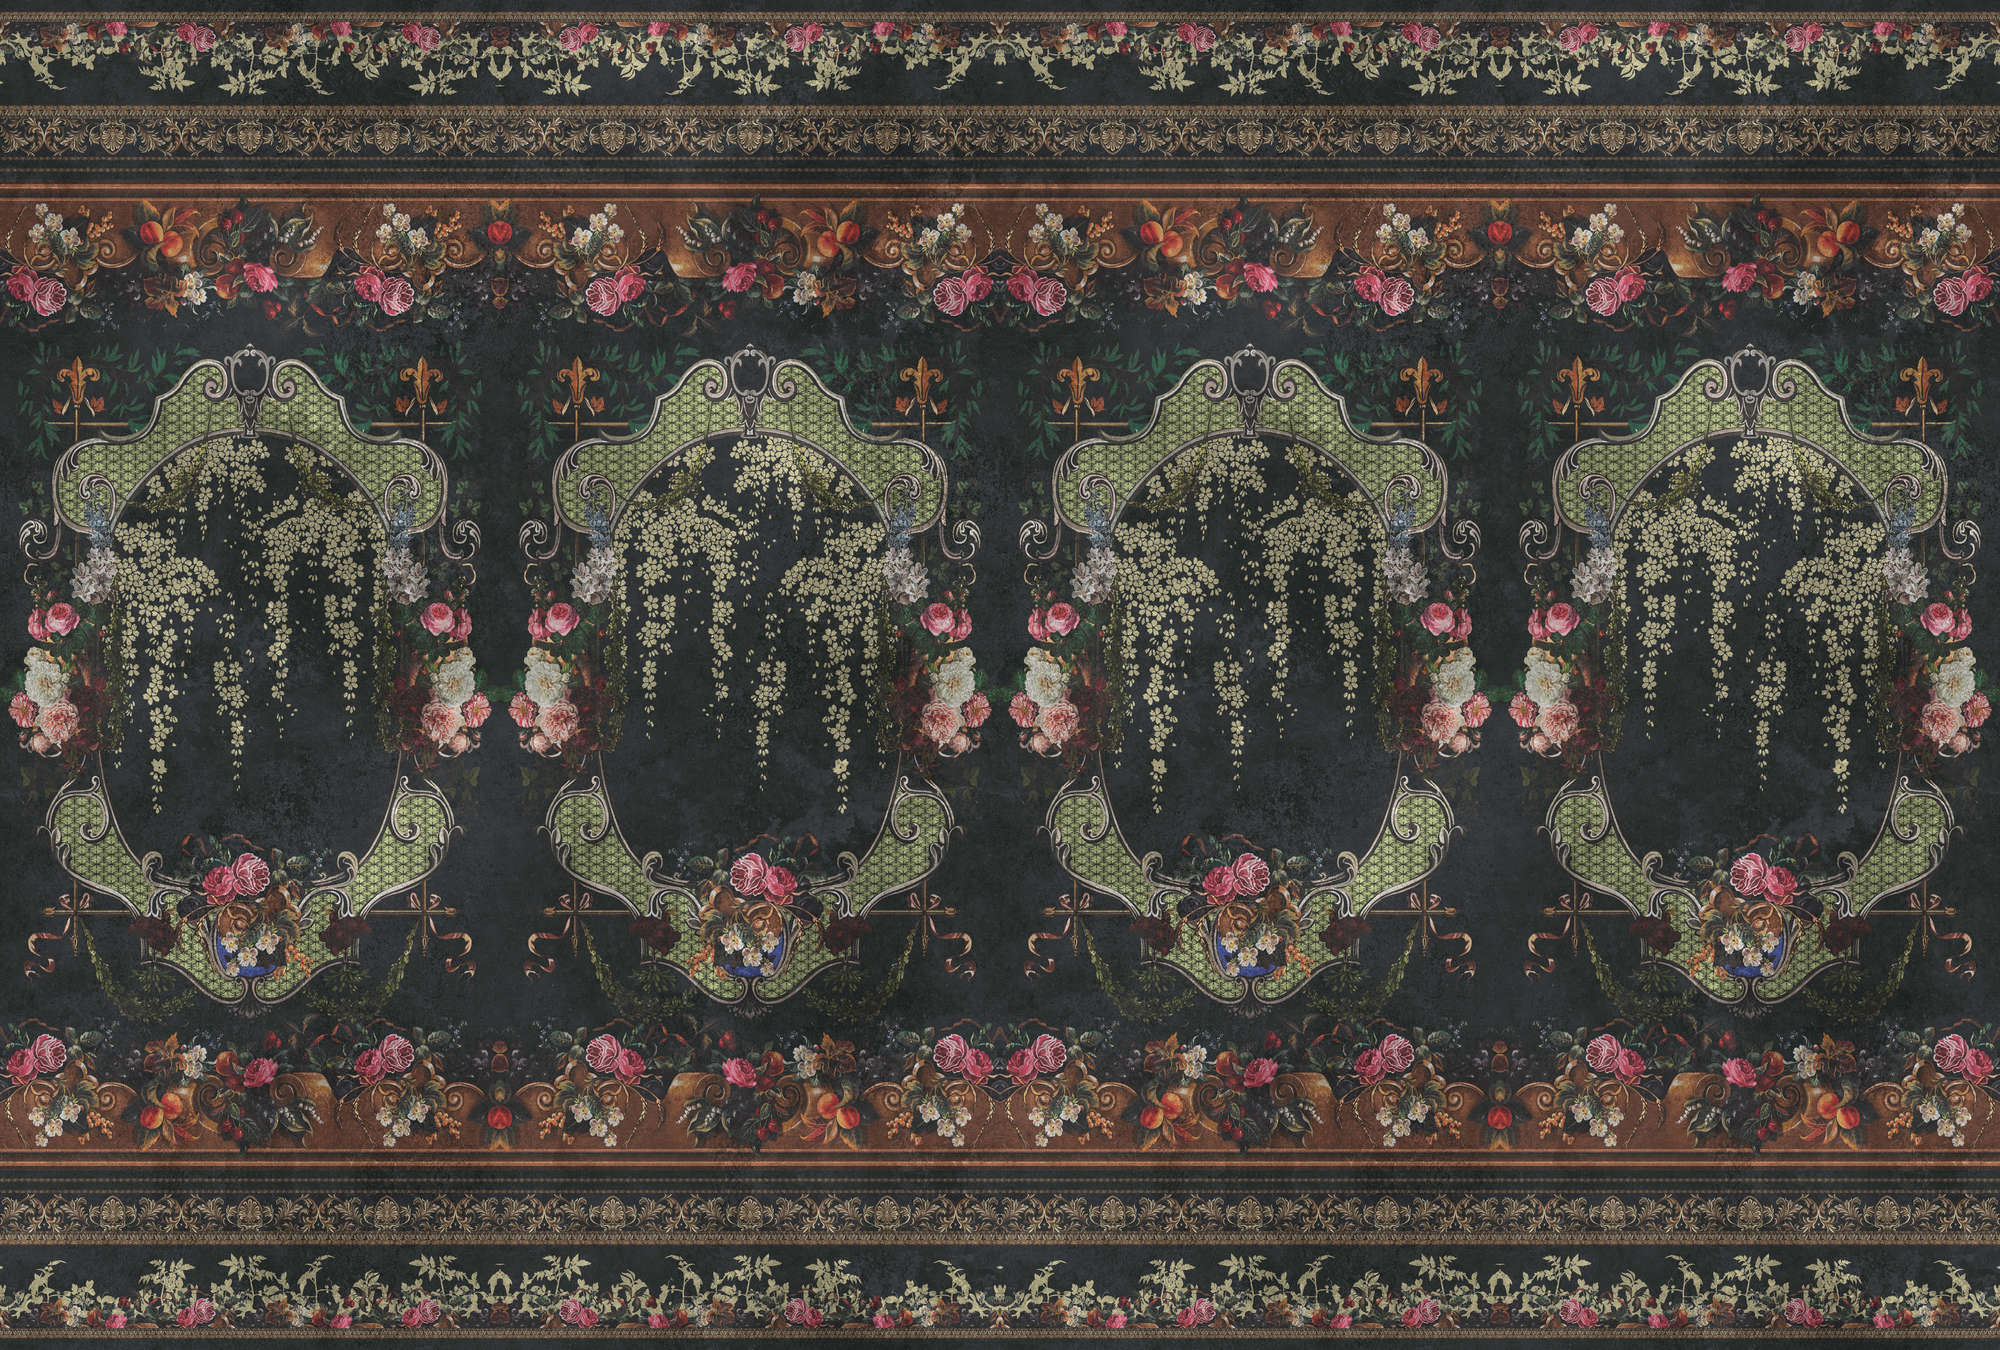             Photo wallpaper »babette« - Ornamental panelling with floral design on vintage plaster texture - red, dark blue | matt, smooth non-woven
        